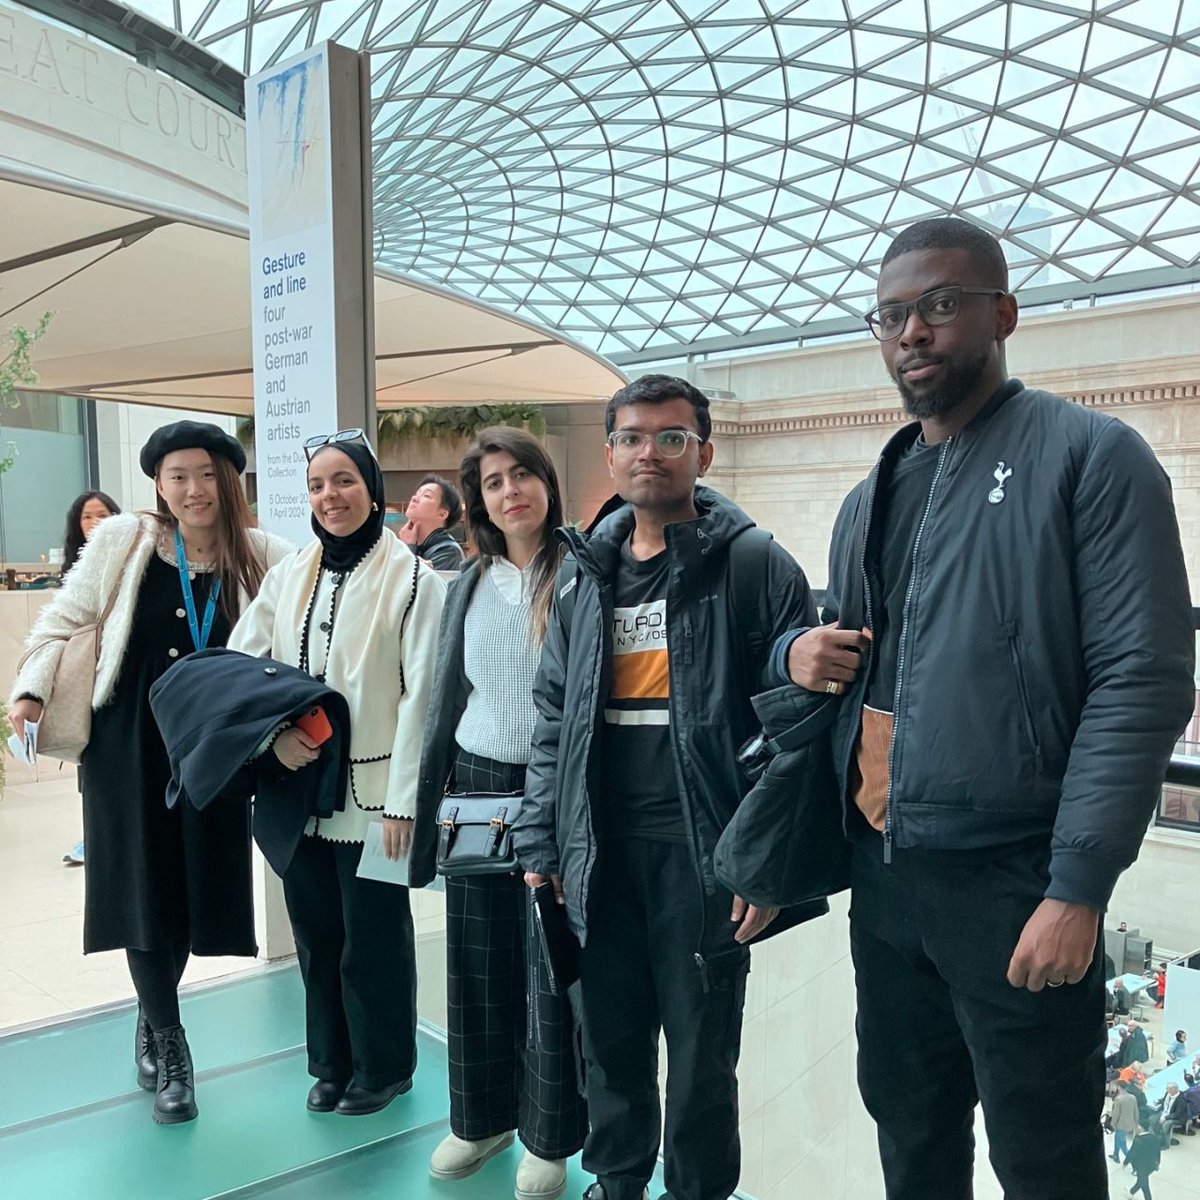 Ravensbourne’s international student team have been keeping our new international students busy! 🌎 Recently they enjoyed adventures in the TATE Modern & tours round the Victoria and Albert museum 🤩 We want our students to enjoy exploring London & make friends along the way💙